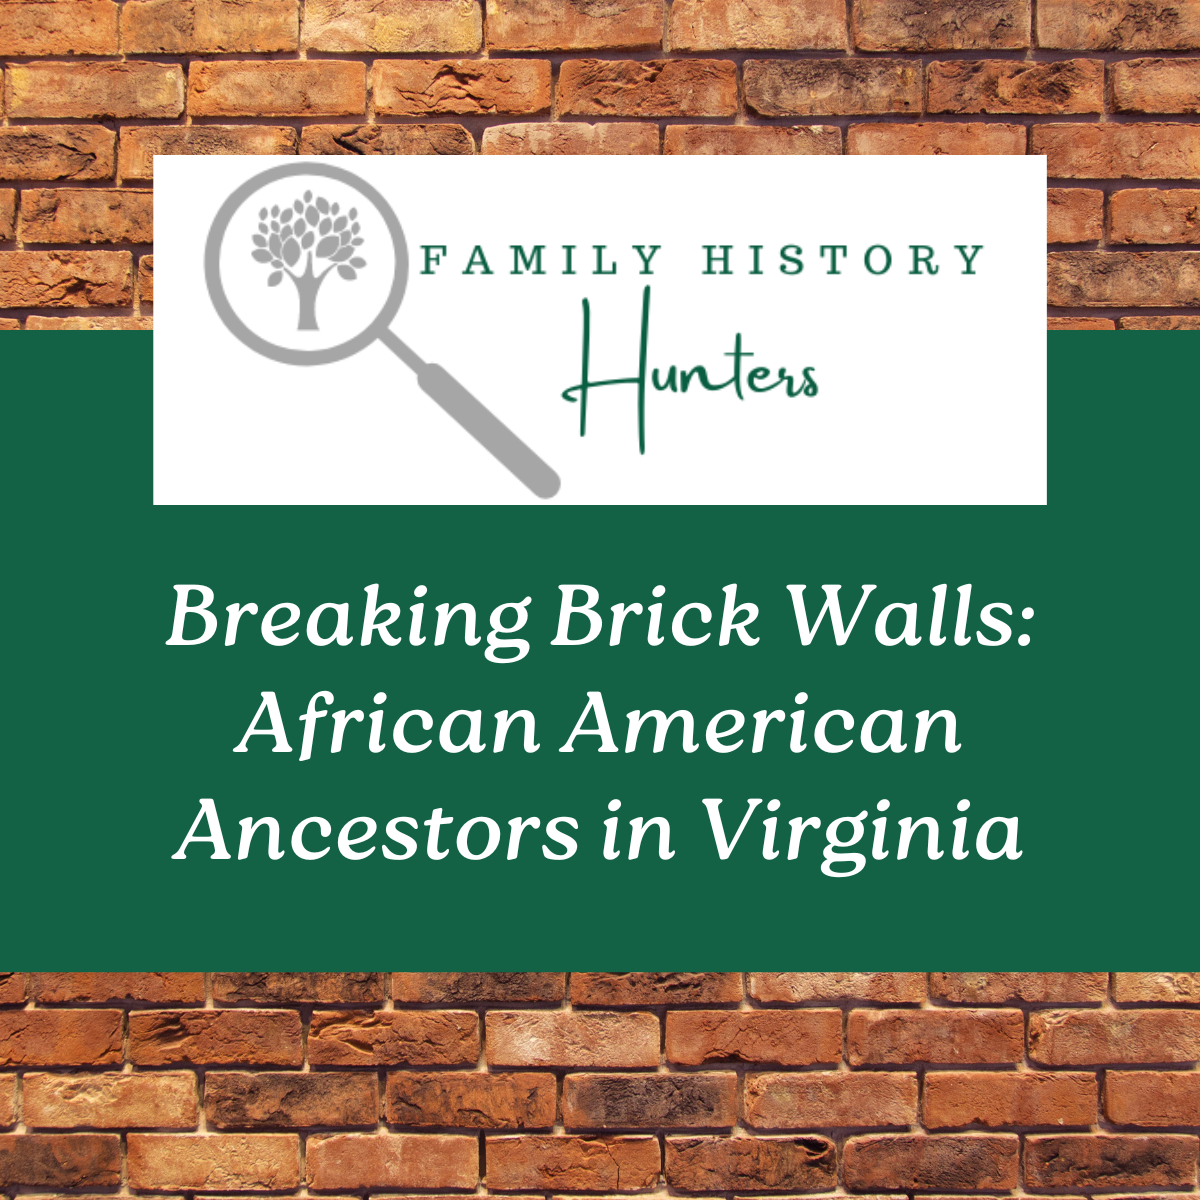 Family History Hunters Breaking Brick Walls: African American Ancestors in Virginia with green and brick background